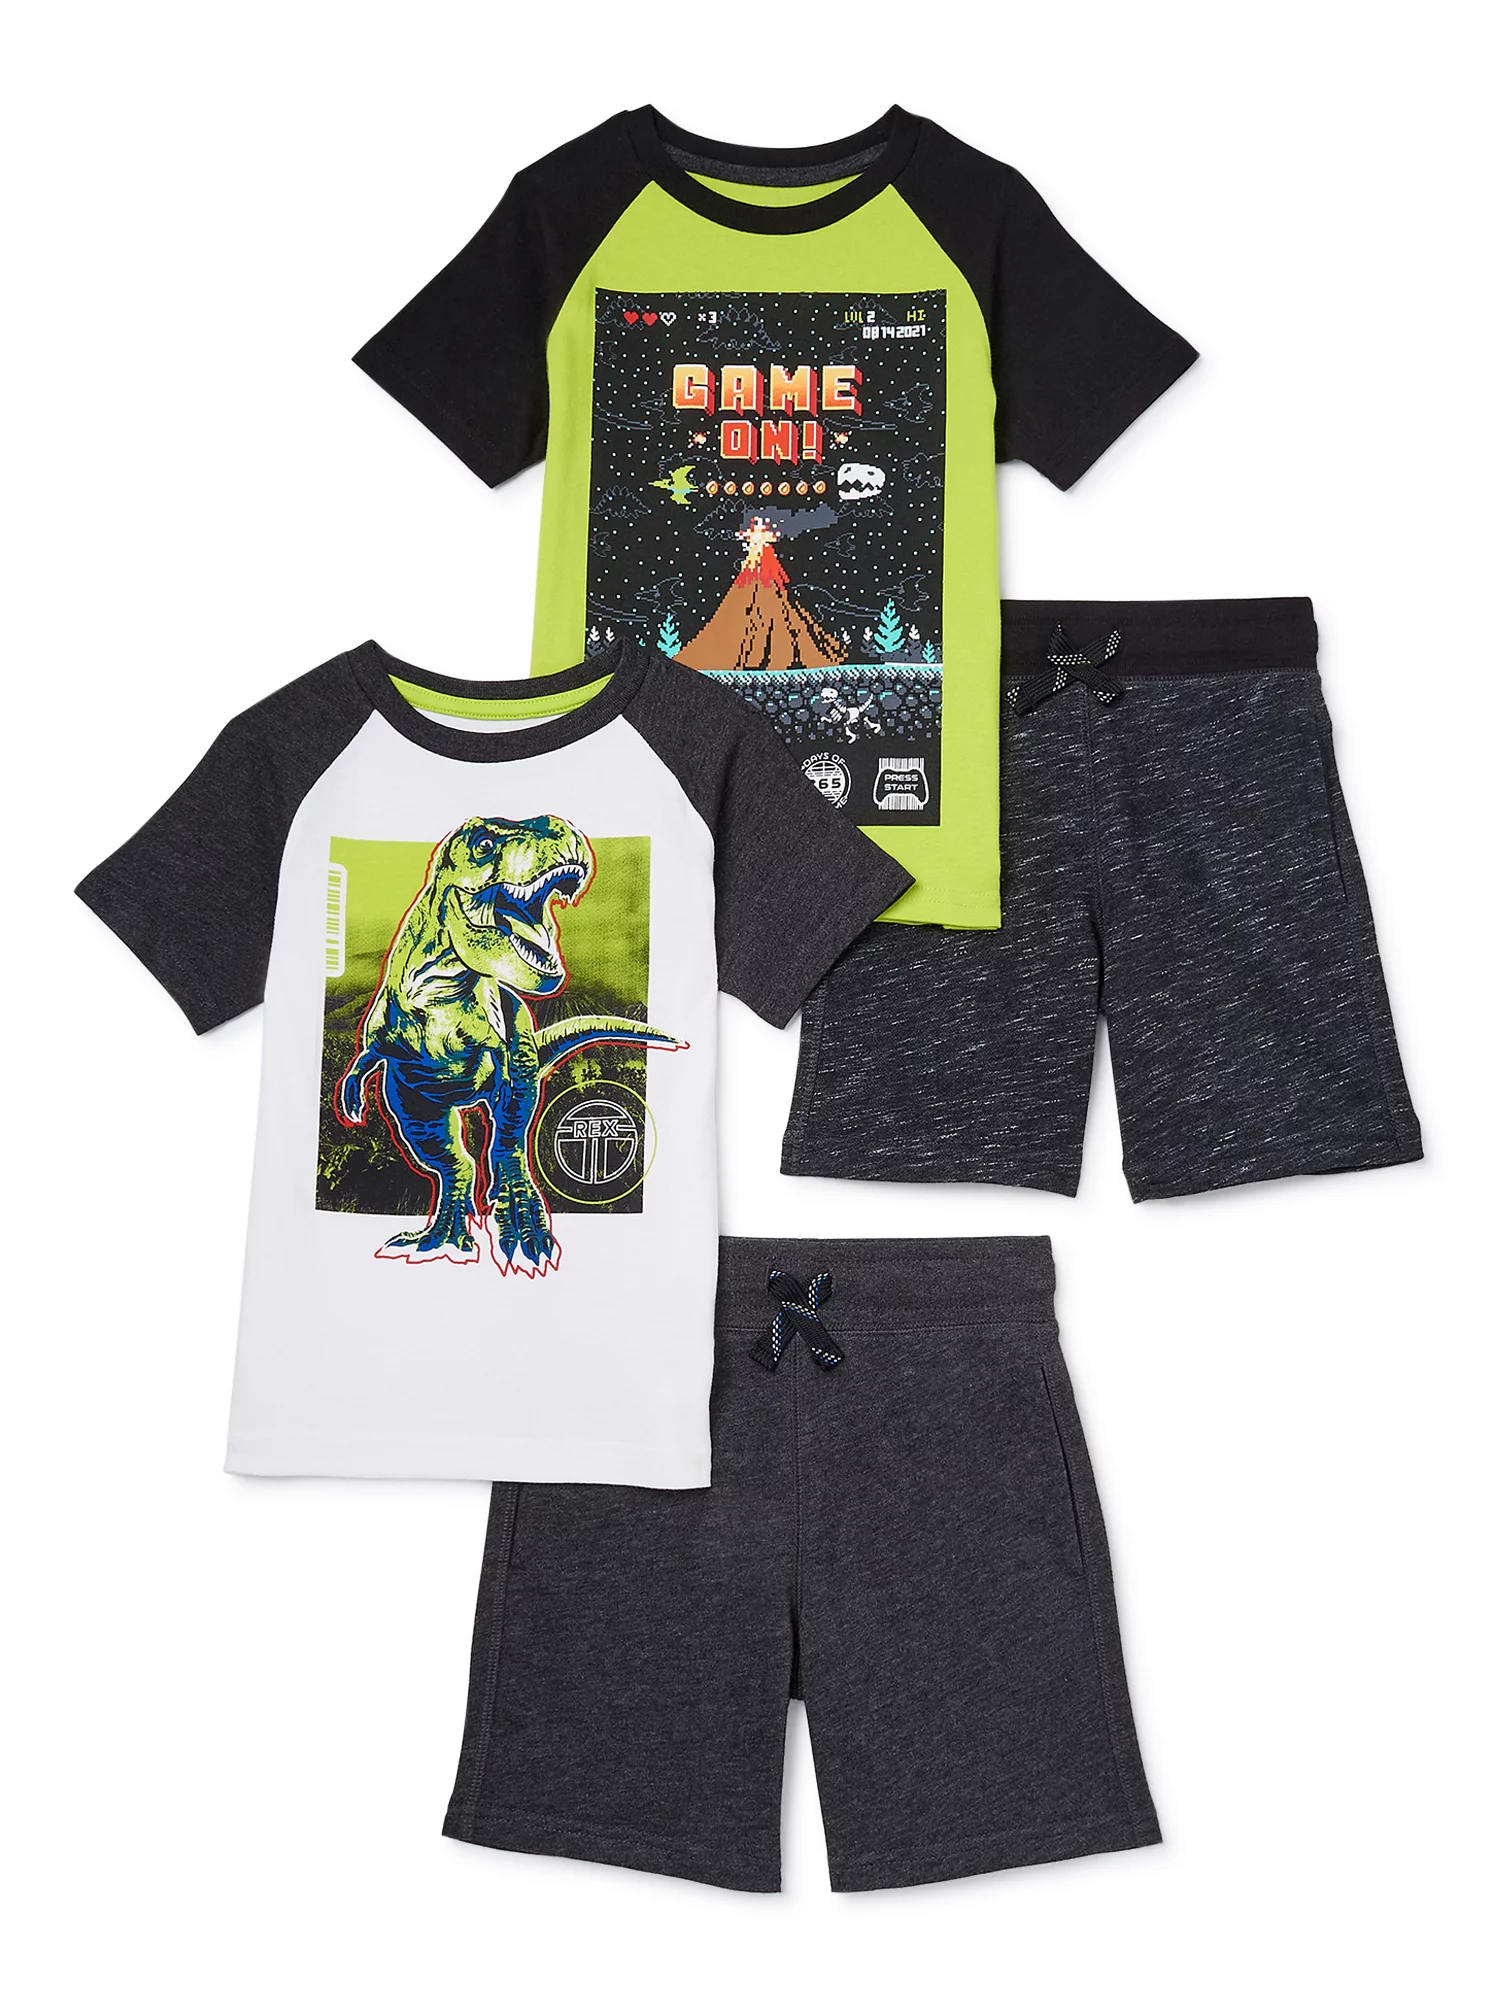 365 Kids from Garanimals Boys Graphic Short Sleeve Tee and French Terry Short, 4-Piece Outfit Set, Sizes 4-10